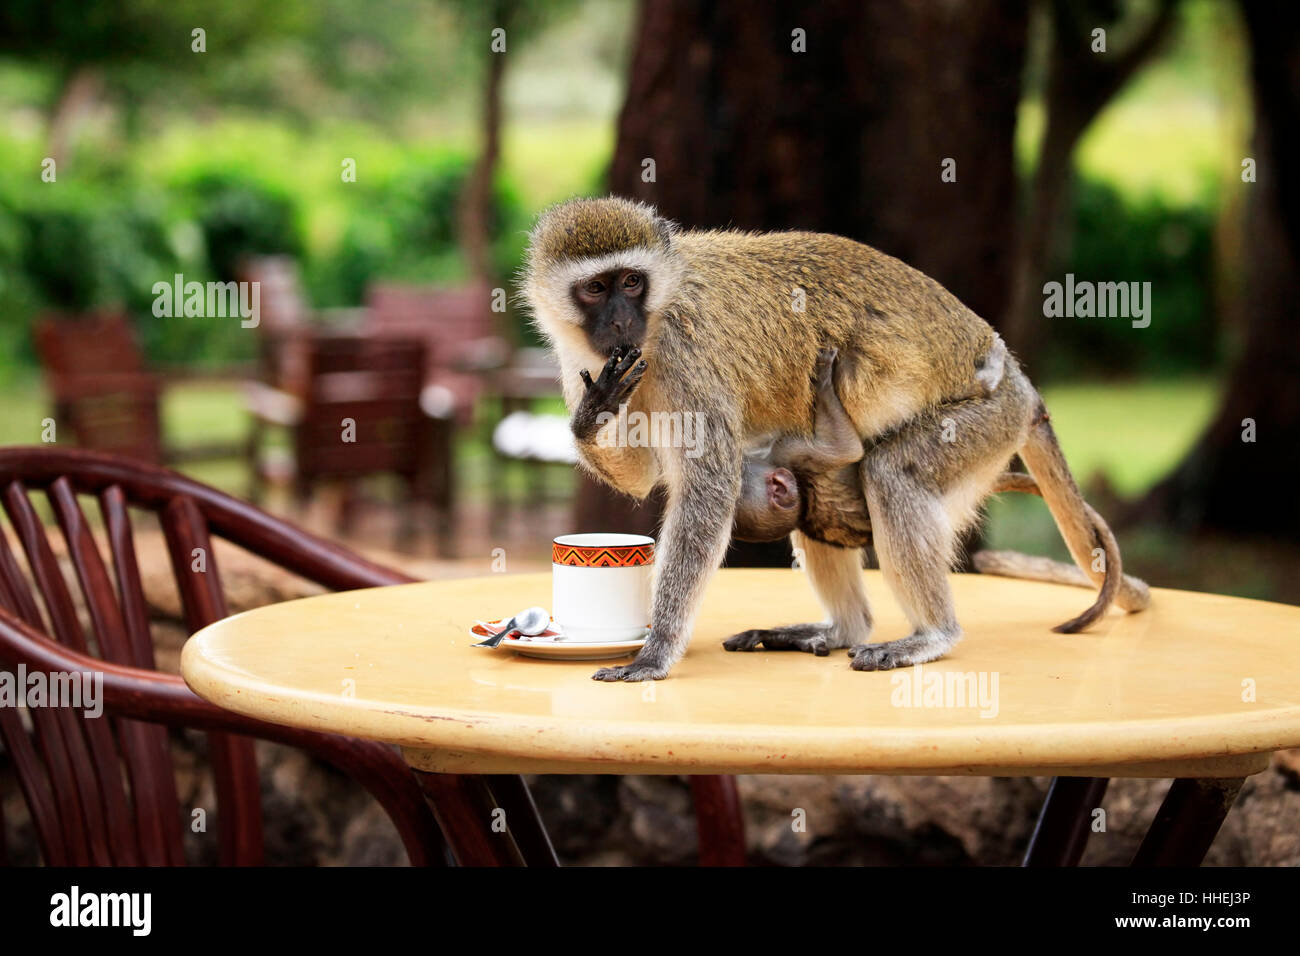 Monkey with a baby drinking from a cup Stock Photo